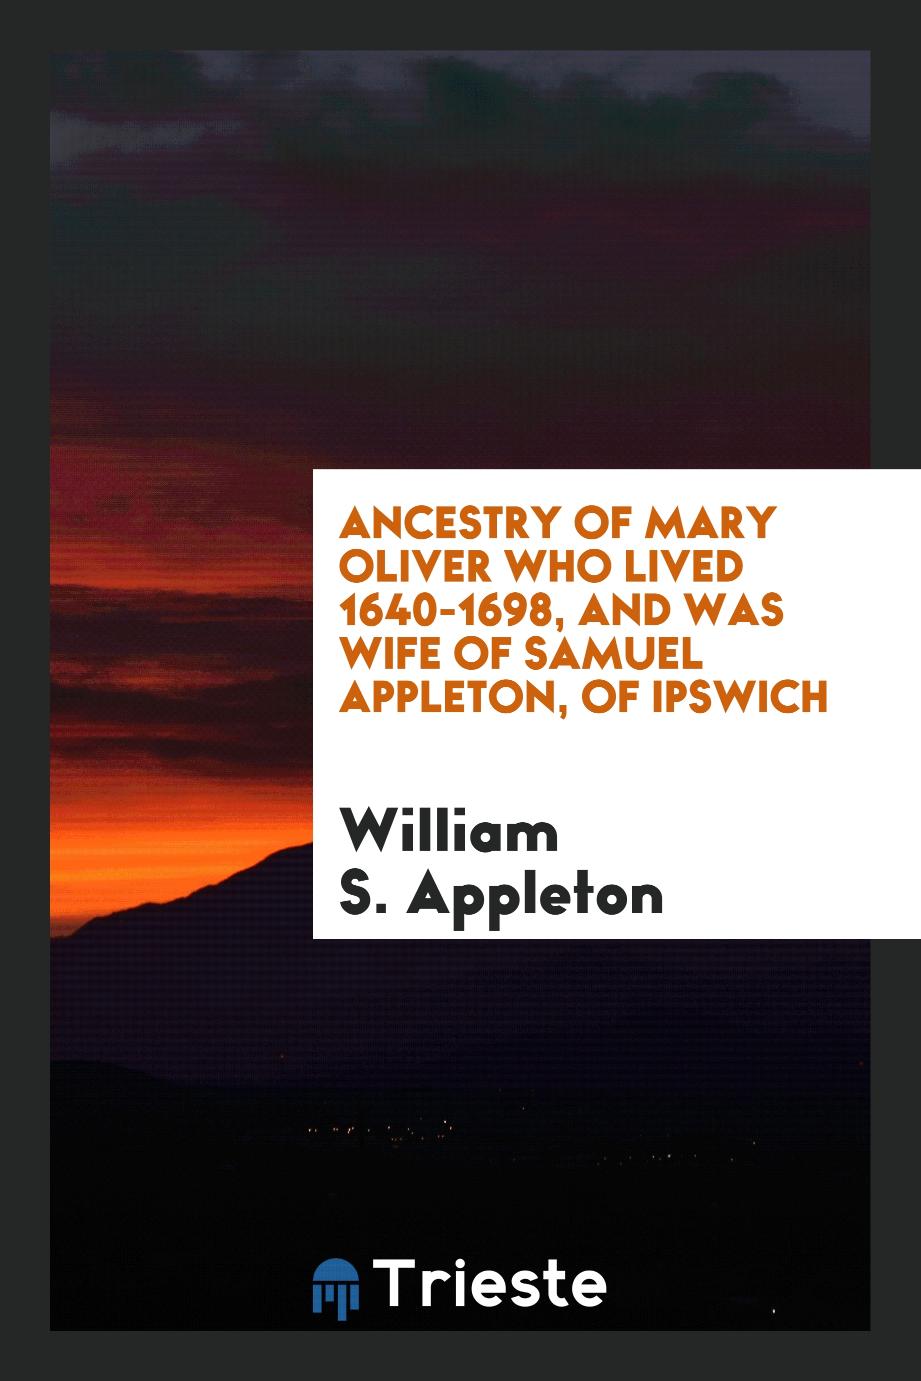 William S. Appleton - Ancestry of Mary Oliver who lived 1640-1698, and was wife of Samuel Appleton, of Ipswich